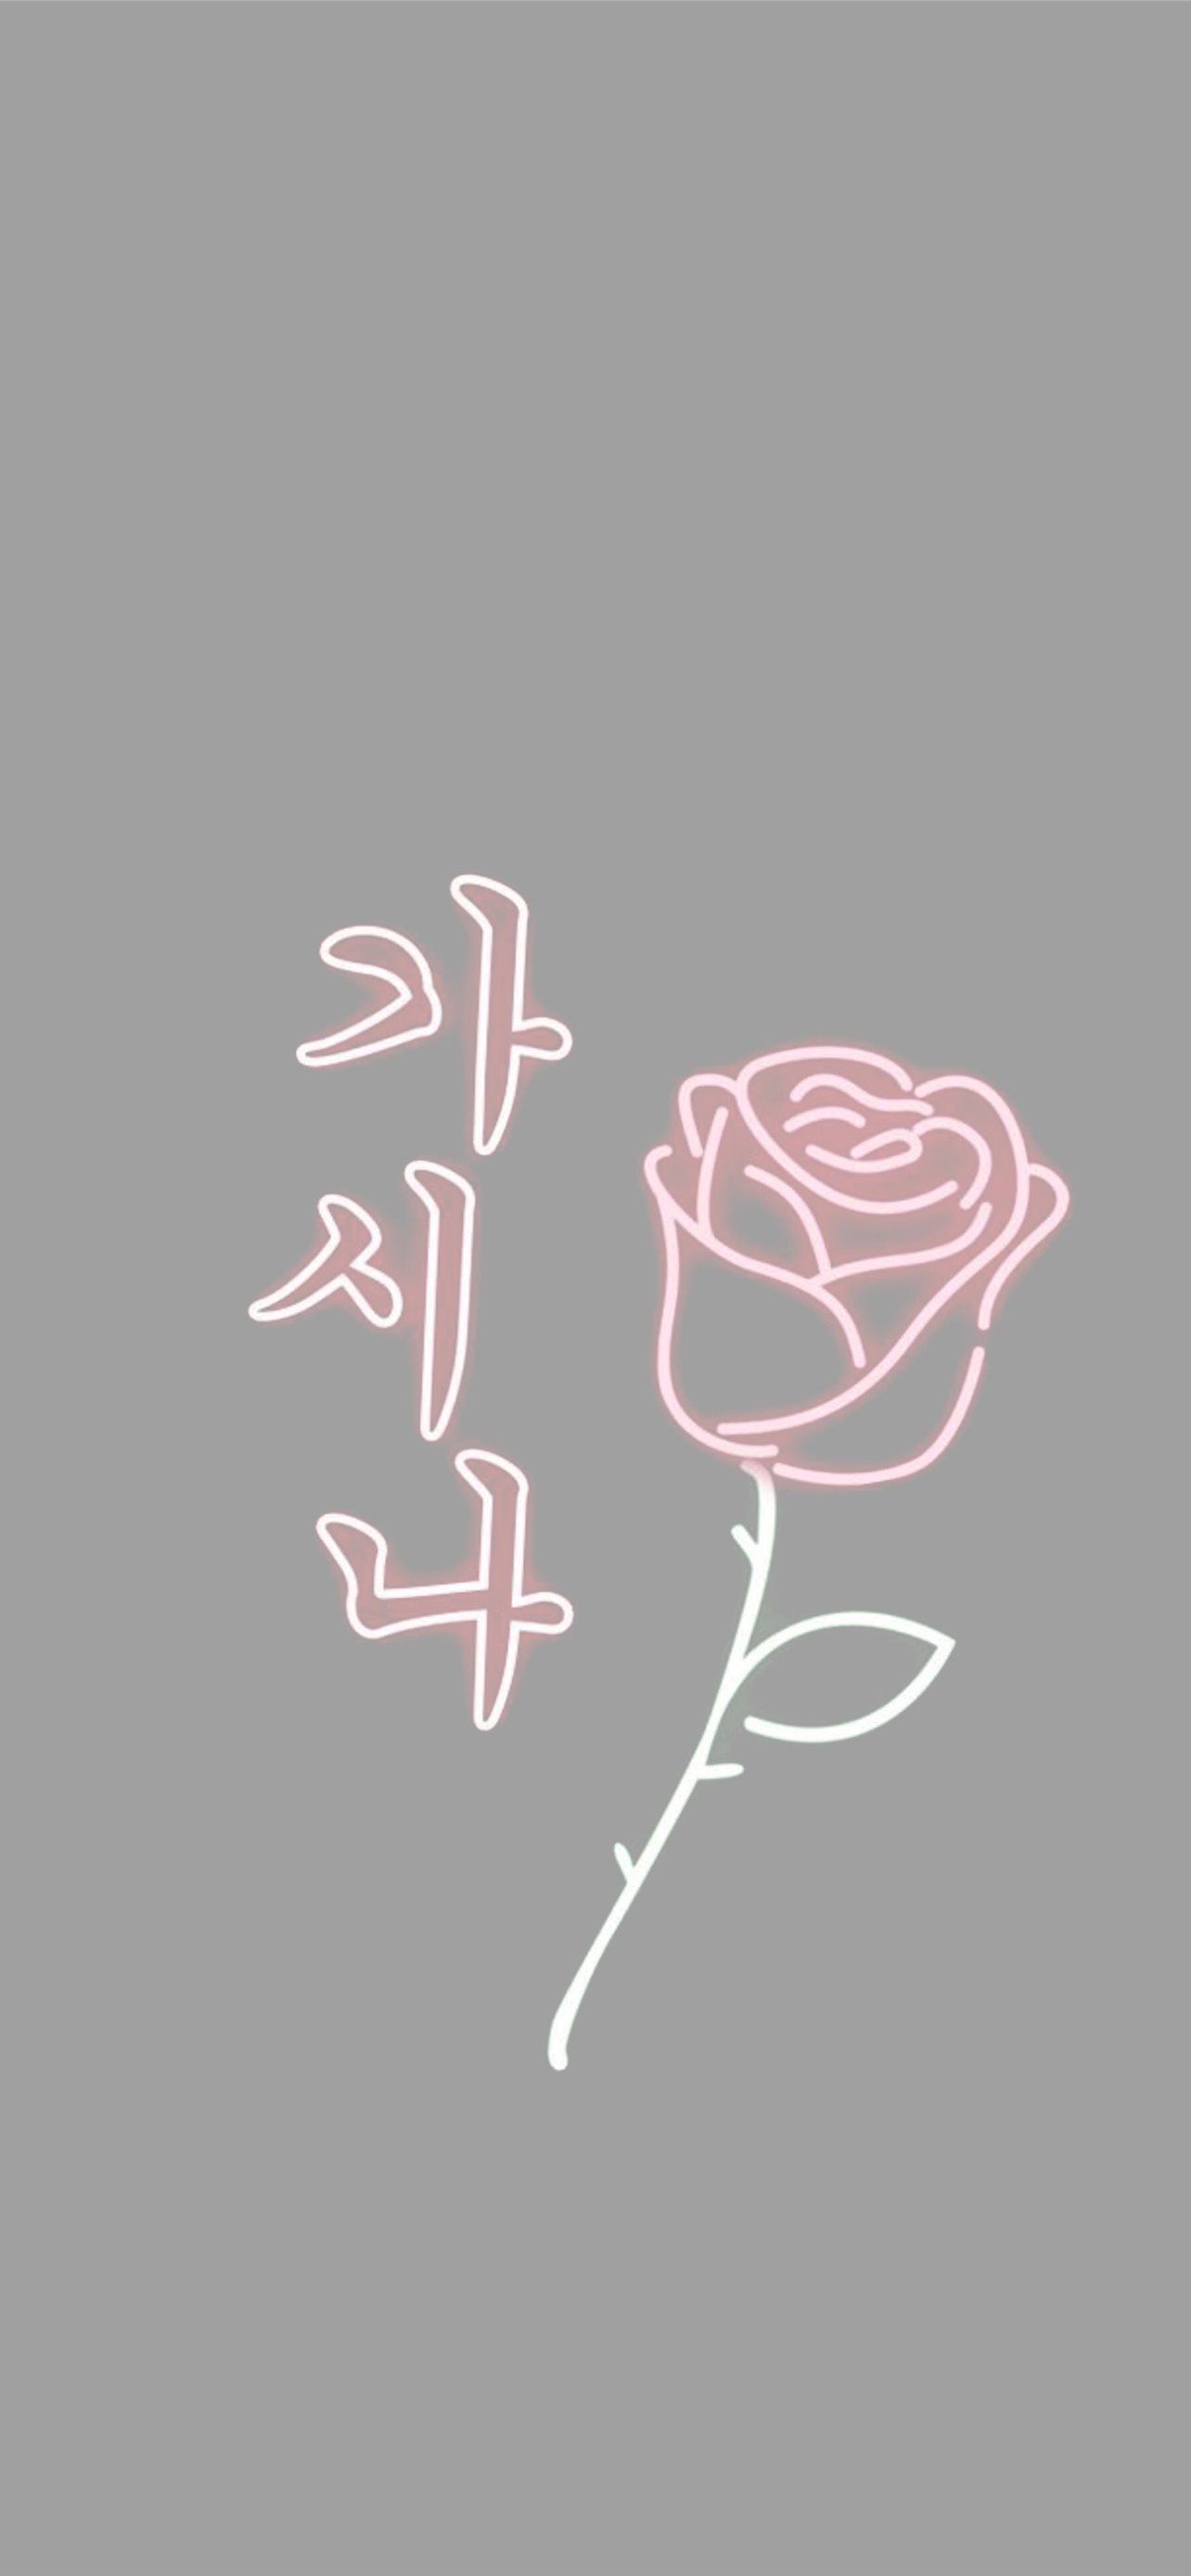 Aesthetic rose wallpaper with Korean text and grey background - Couple, gray, iPhone, roses